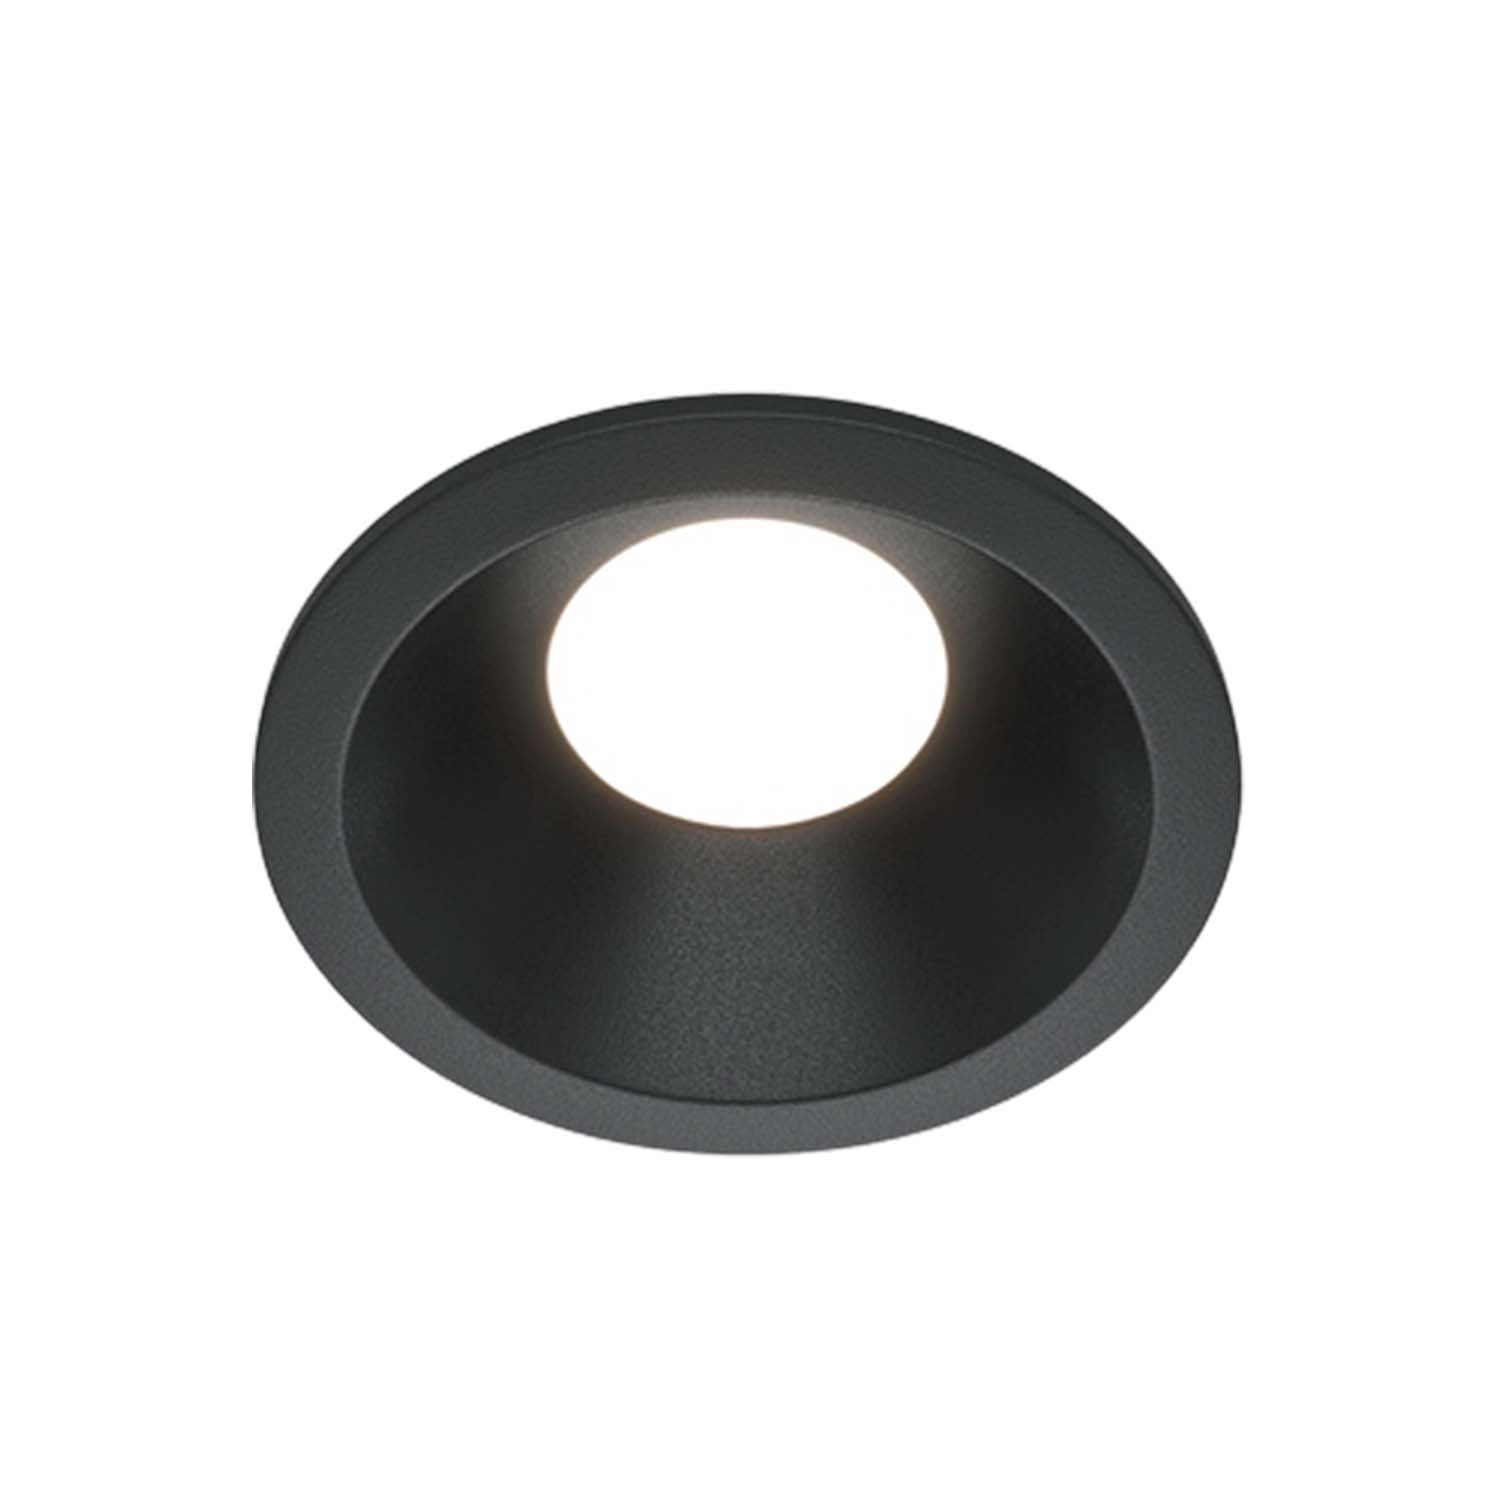 ZOOM A - Waterproof outdoor round recessed spotlight, black or white, 85mm